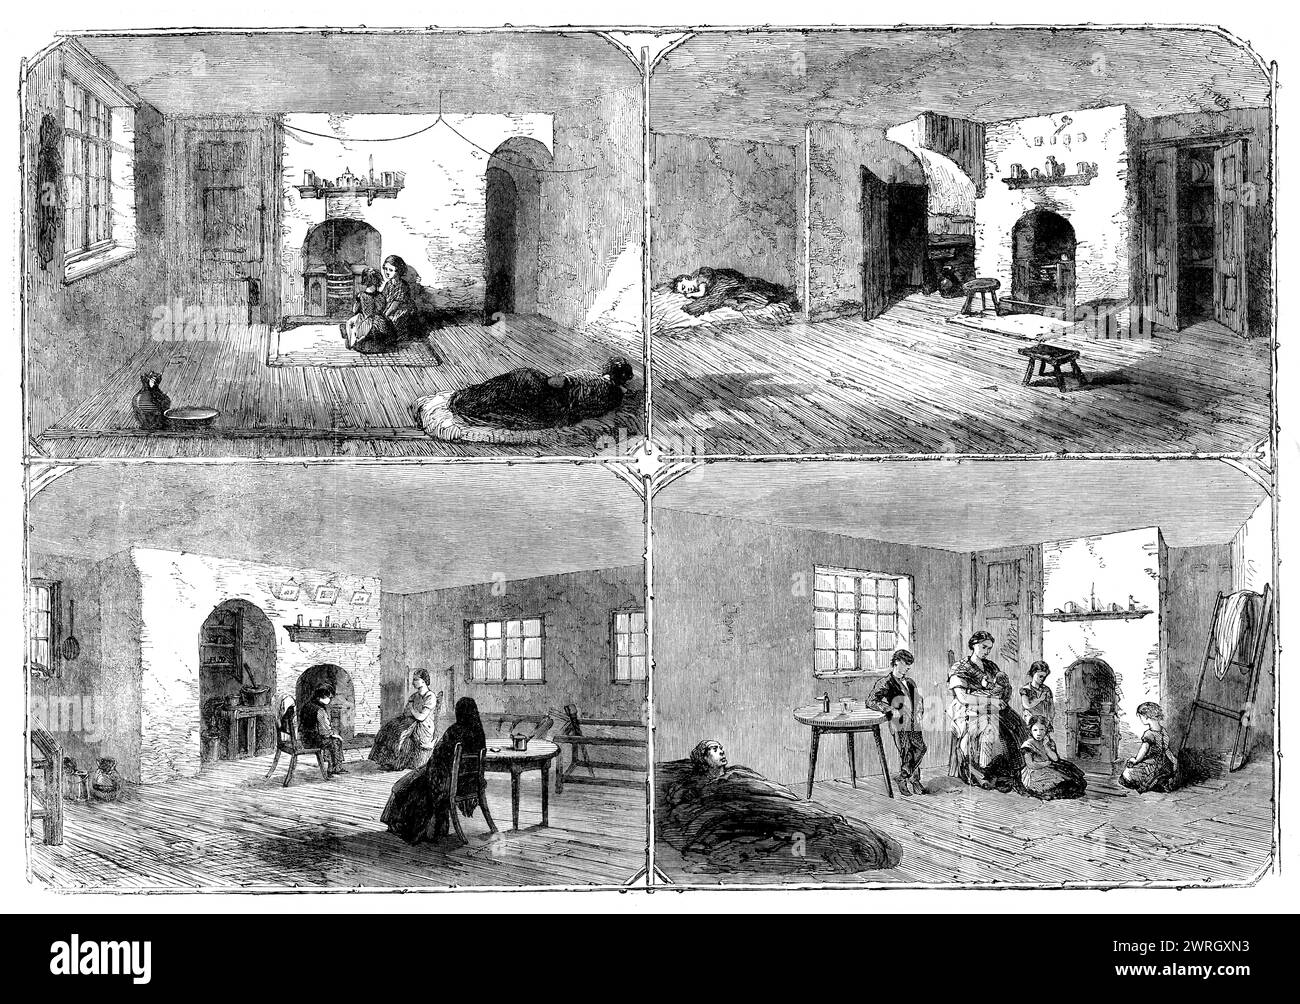 The Cotton Famine: dwellings of Manchester operatives, 1862. Starvation and destitution among unemployed Lancashire textiles workers. 'No. 18, Back Queen-street, Deansgate; 3, Tickle-street, Deansgate; No. 4, Thornton-court, Tickle-street; 13, Southern-street, Liverpool-road...The poor people cannot maintain themselves. They have exhausted all they had before ever a signal of distress was displayed. From comfortable dwellings most of them have removed to lodgings and lower-rented houses, where, divested of every scrap of furniture or bedding, they have been found, in many cases, too reduced to Stock Photo